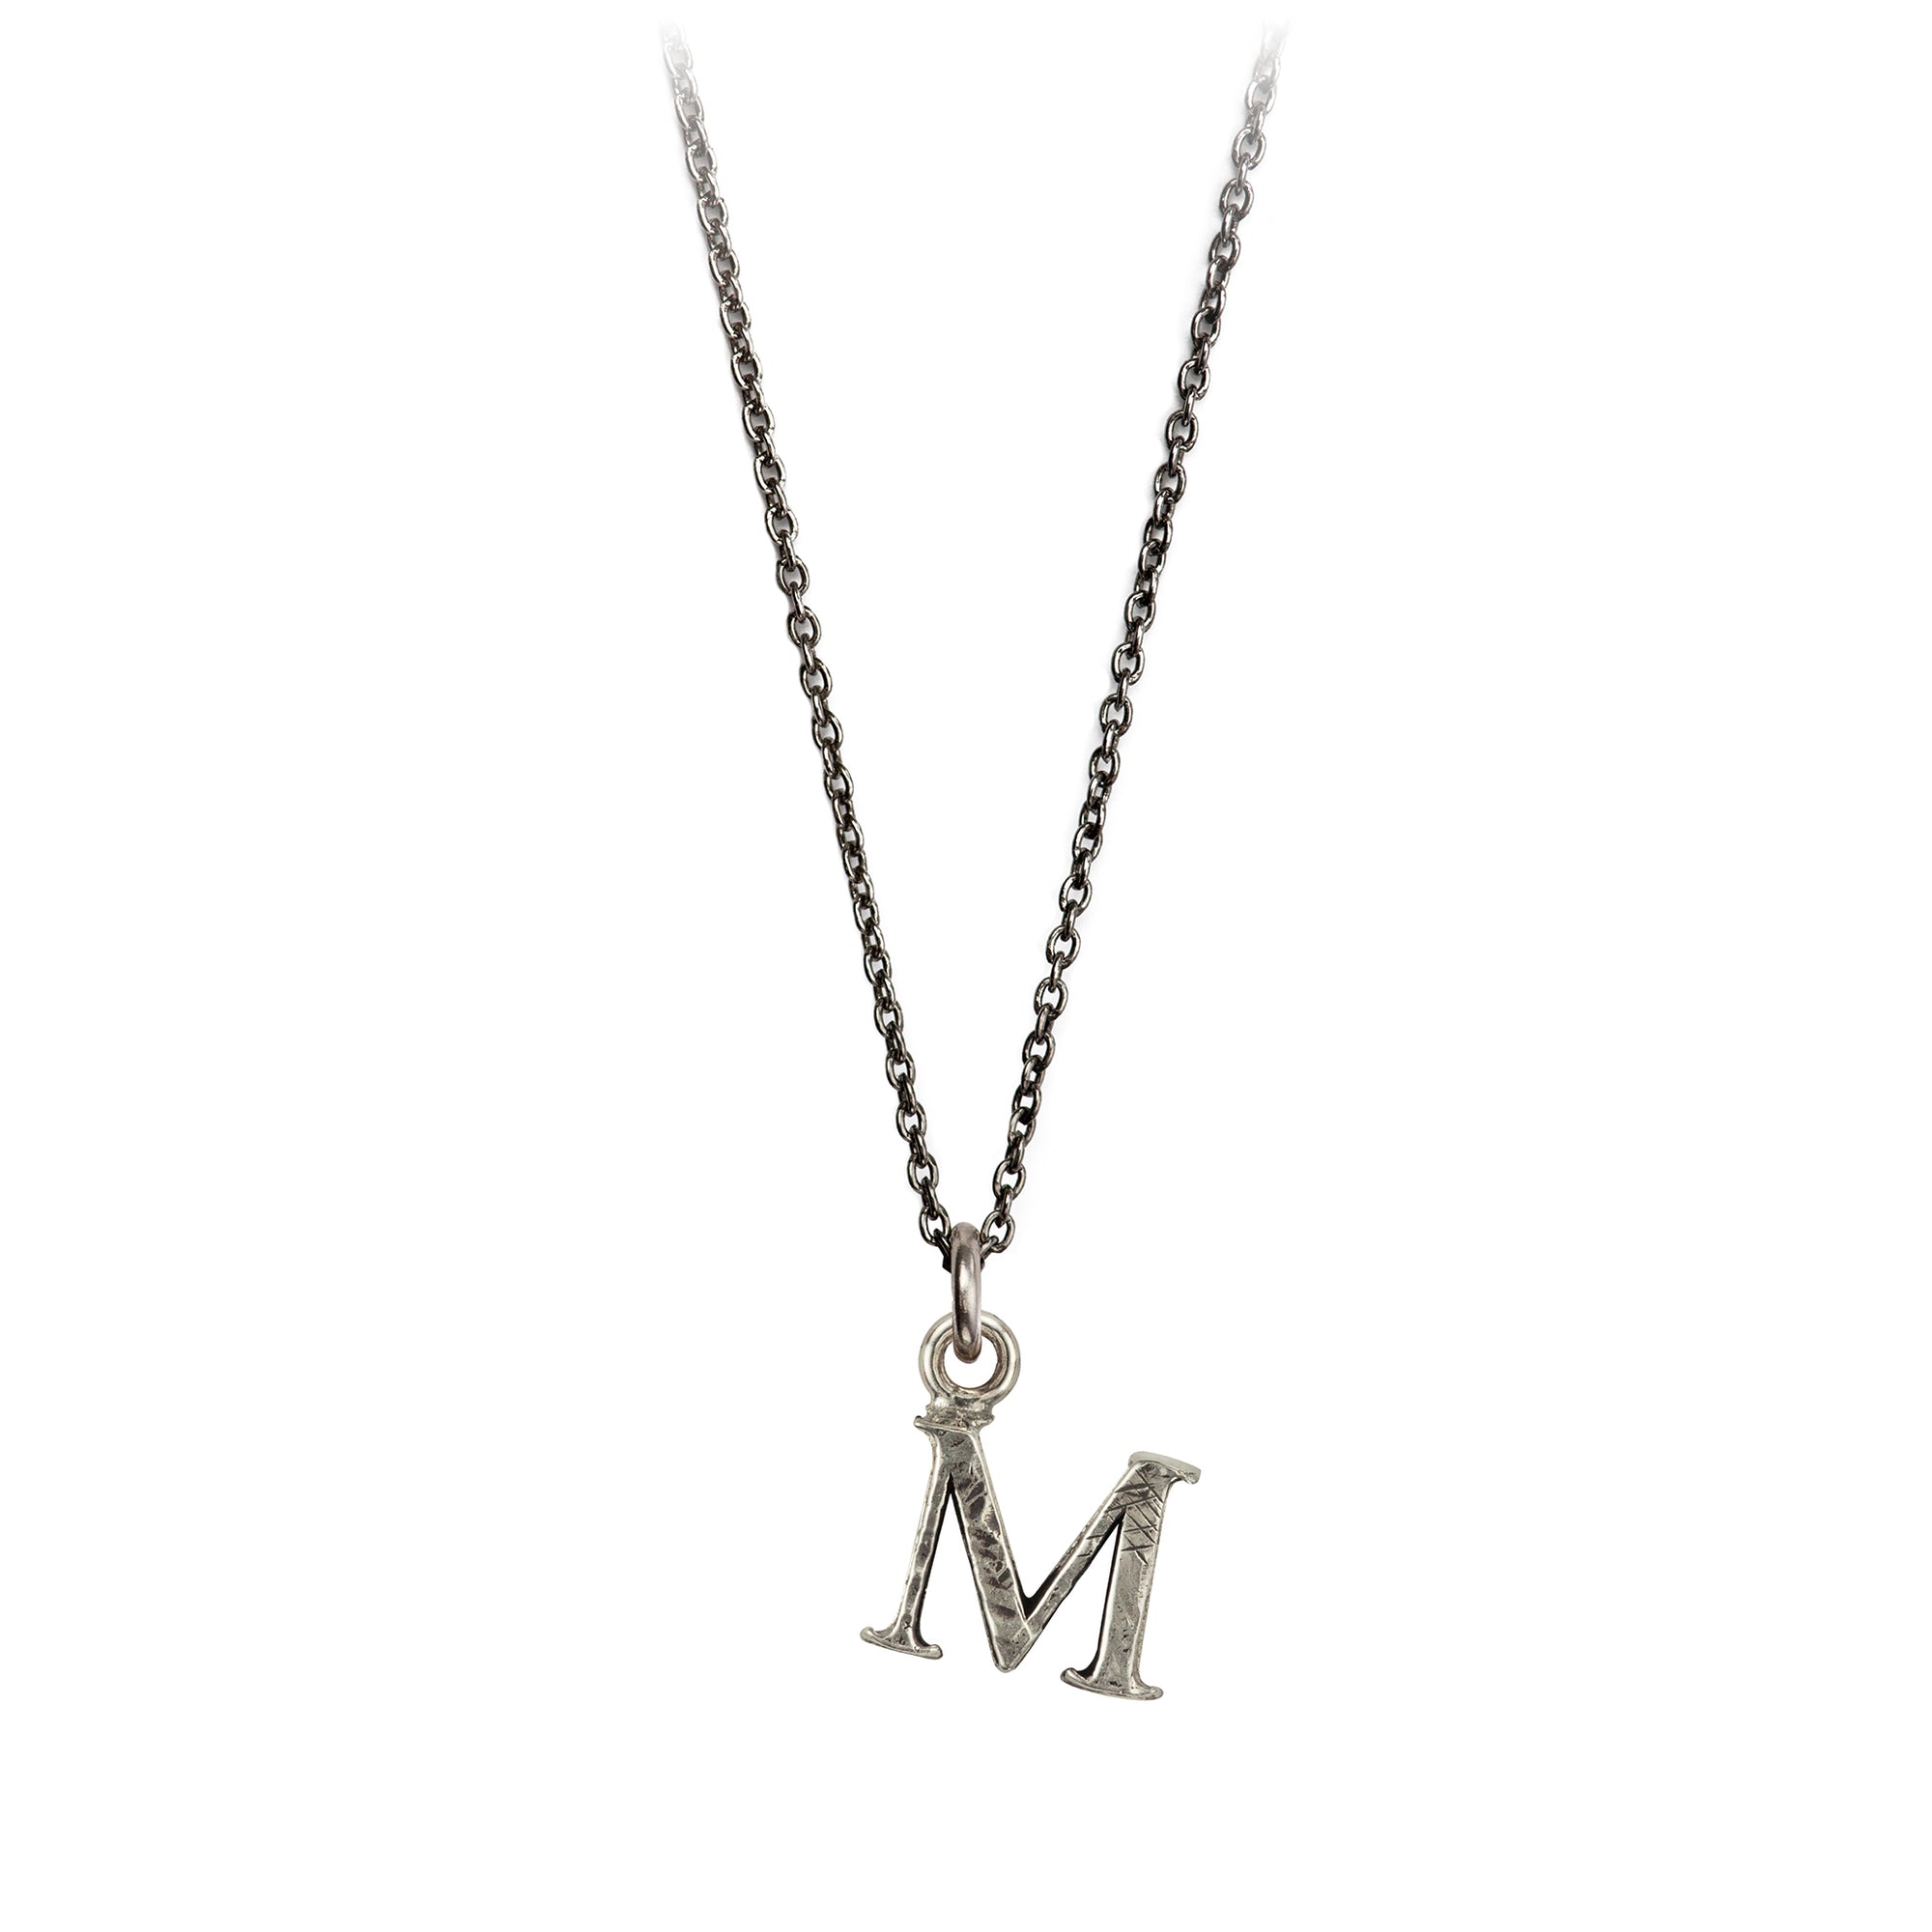 A sterling silver letter "M" charm on a silver chain.